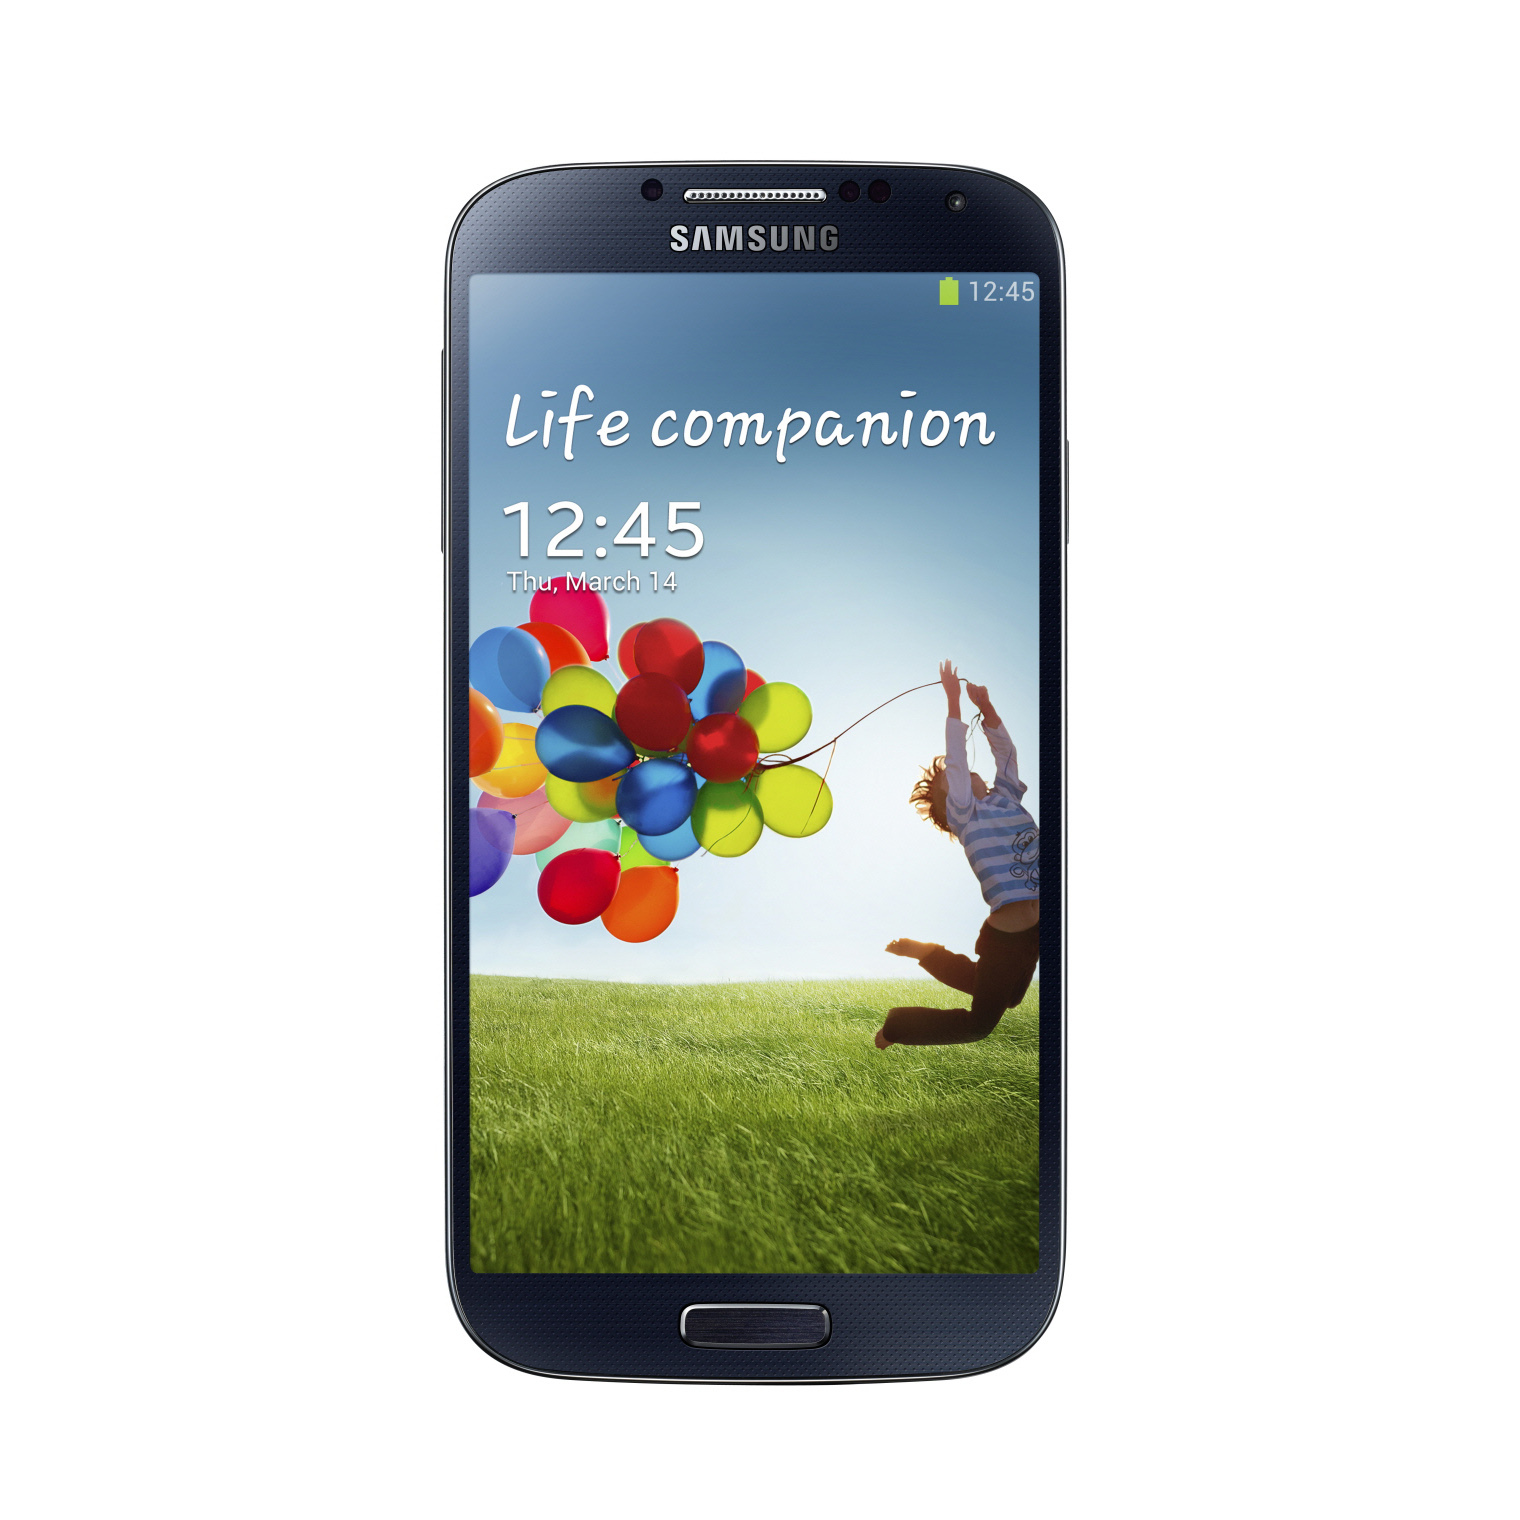 Samsung Galaxy S4 review - The Verge